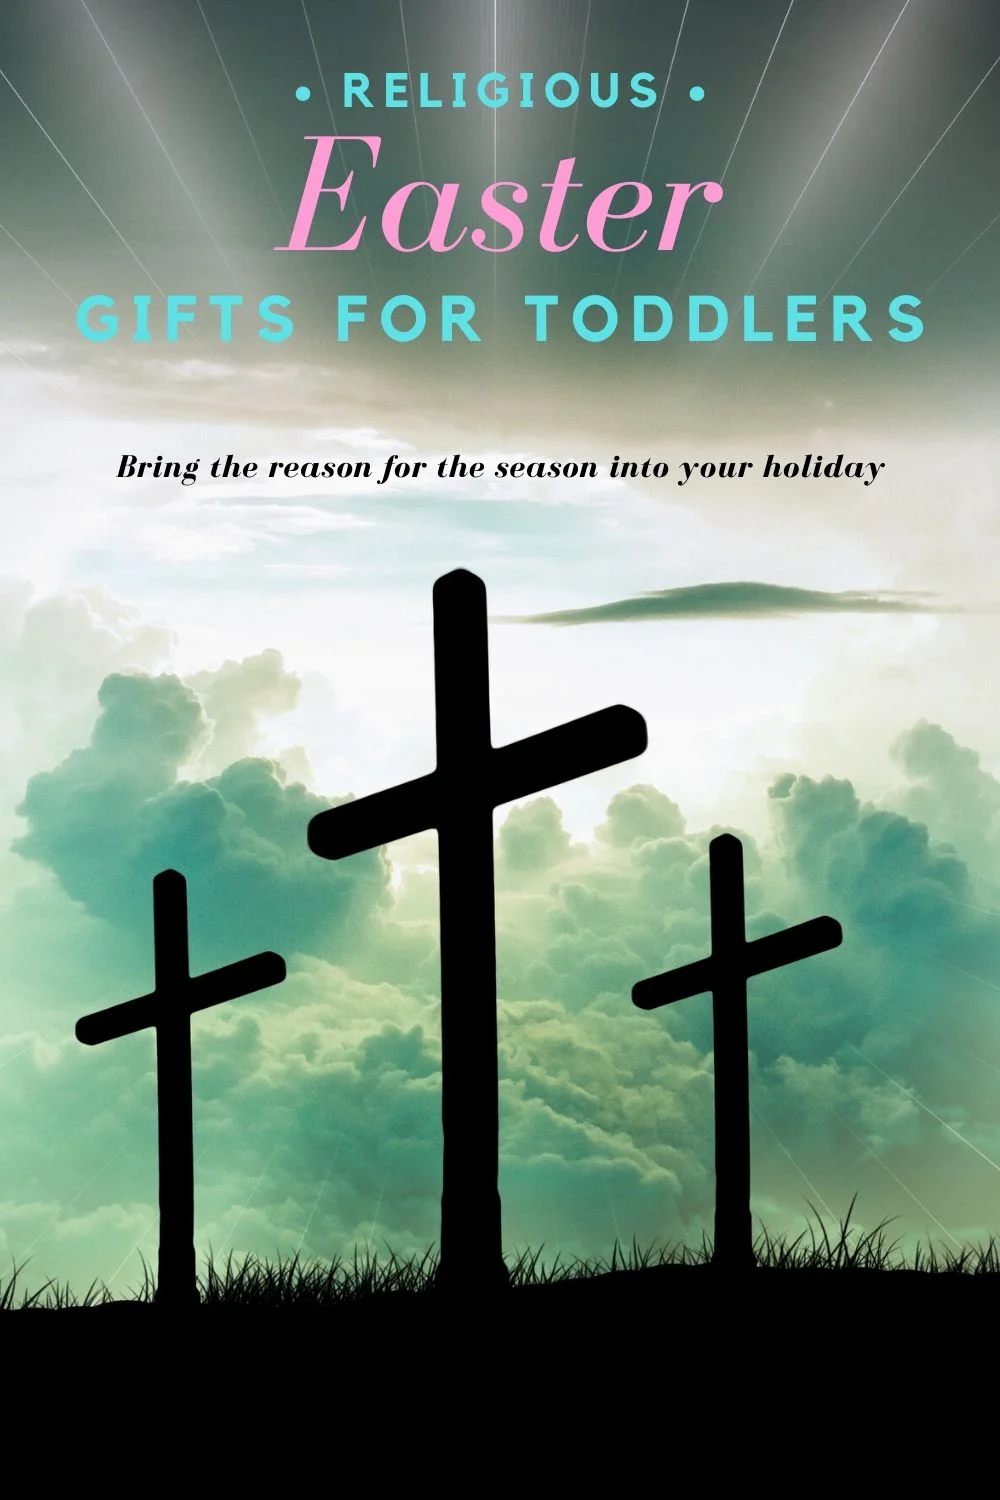 religious easter gift ideas for toddlers noncandy